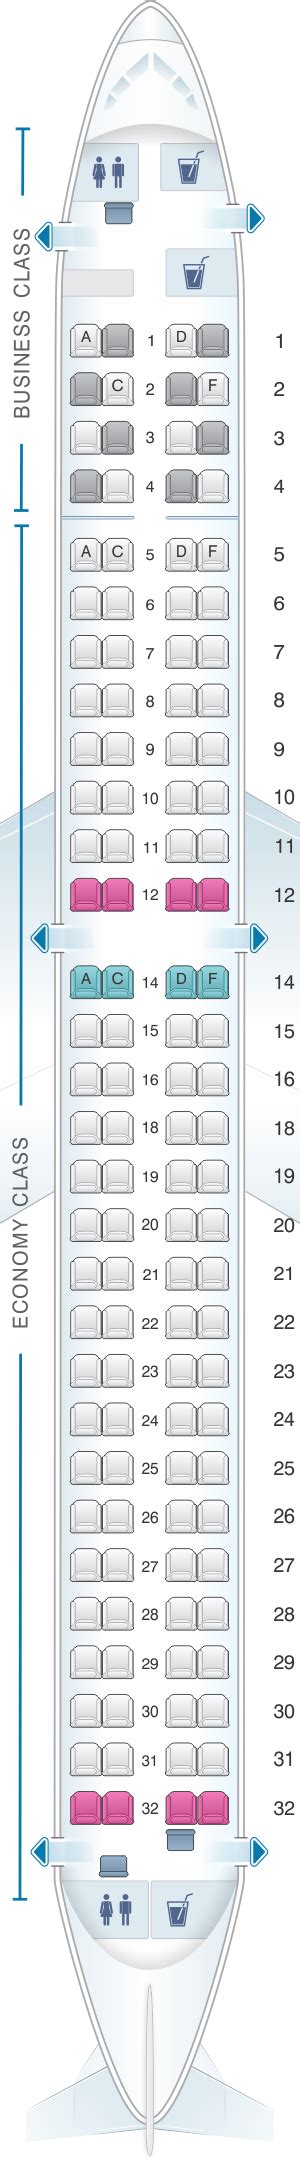 Embraer 195 Seating Chart